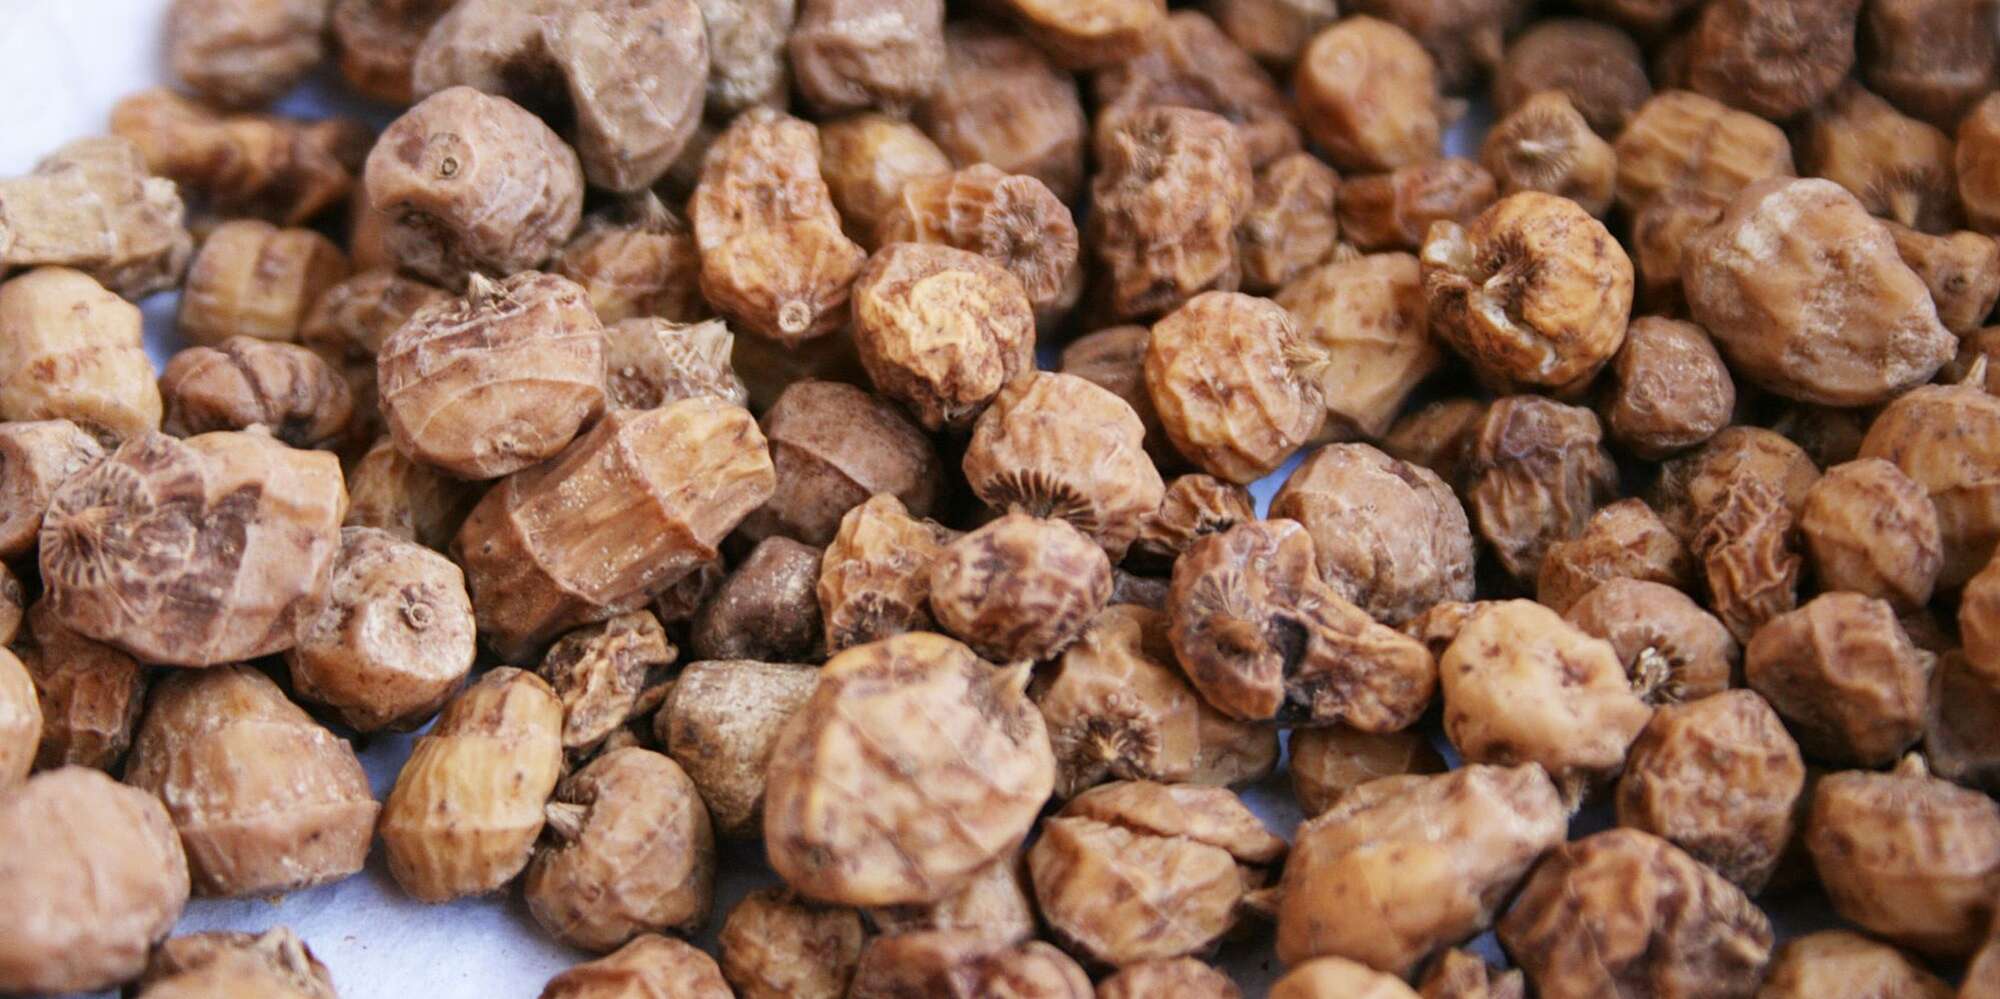 3 Reasons Why Tiger Nuts are About to Become the Next Big Superfood